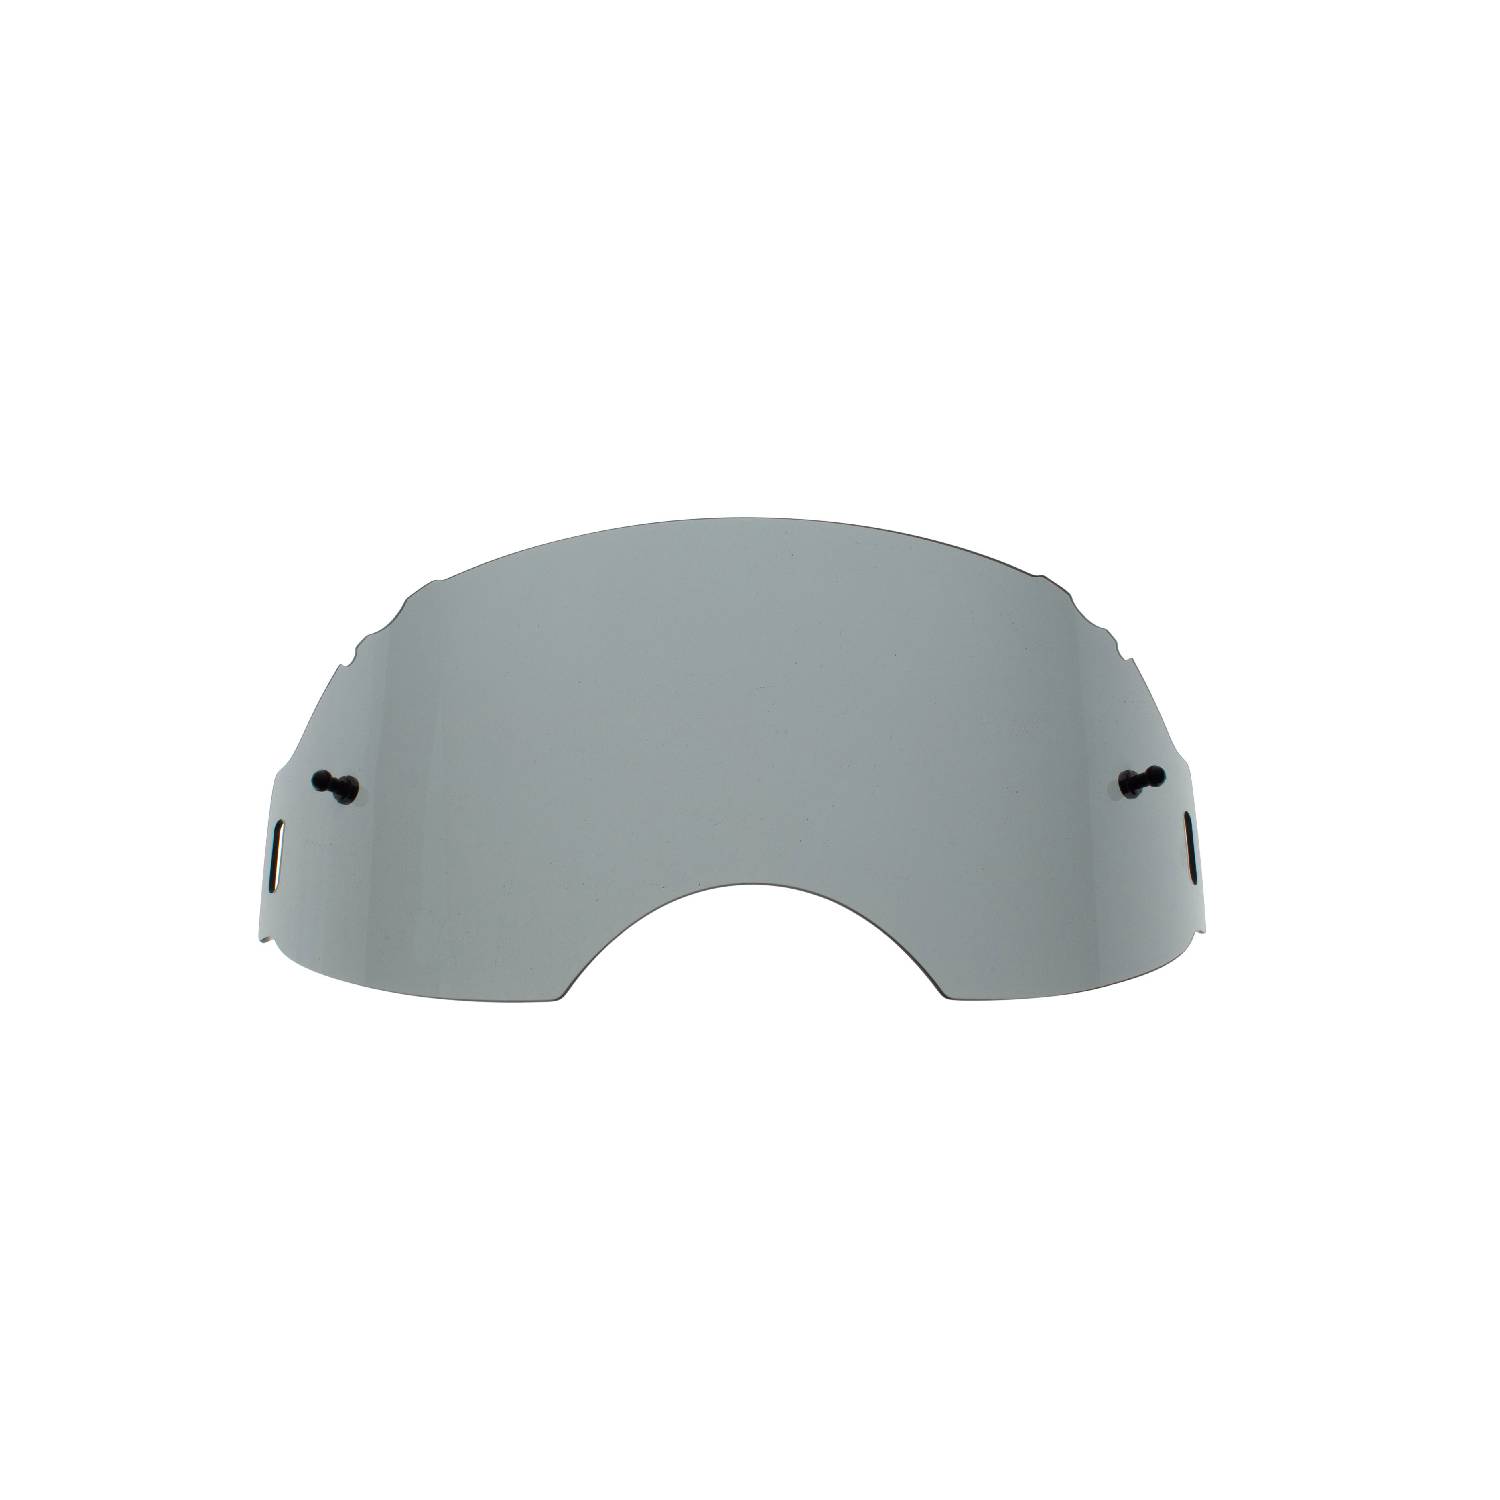 Smoked curved replacement lens, compatible with Oakley Airbrake goggles